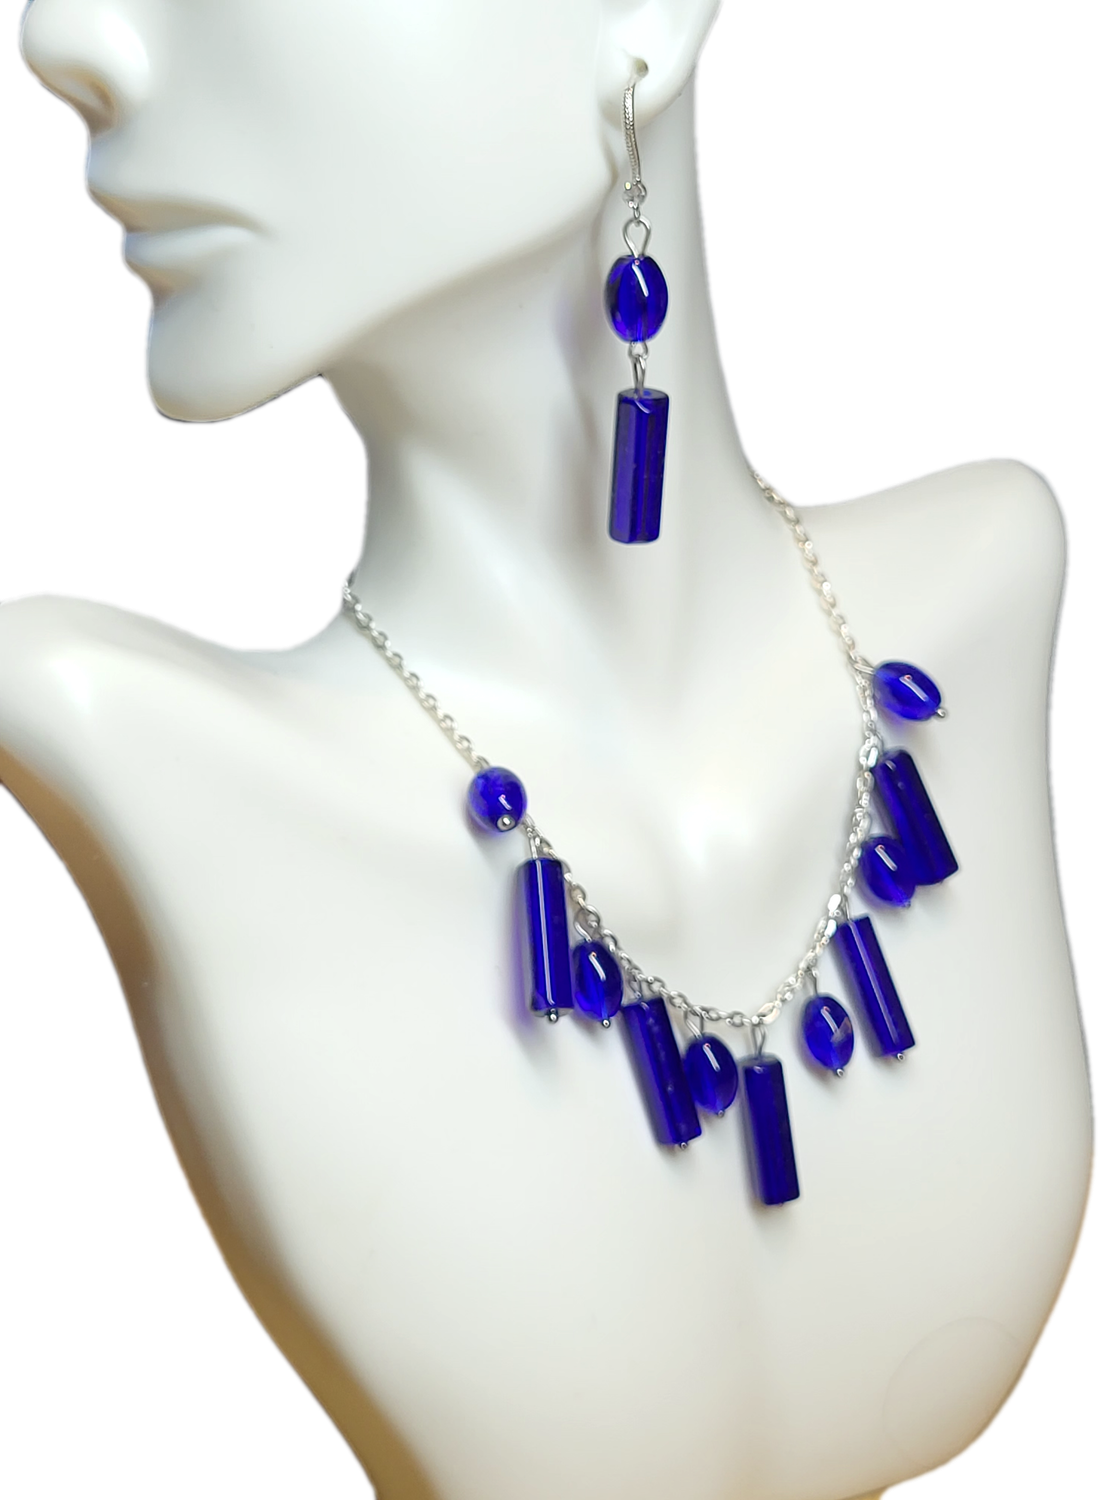 Necklace &amp; Earrings Set with Royal Blue Glass Beads